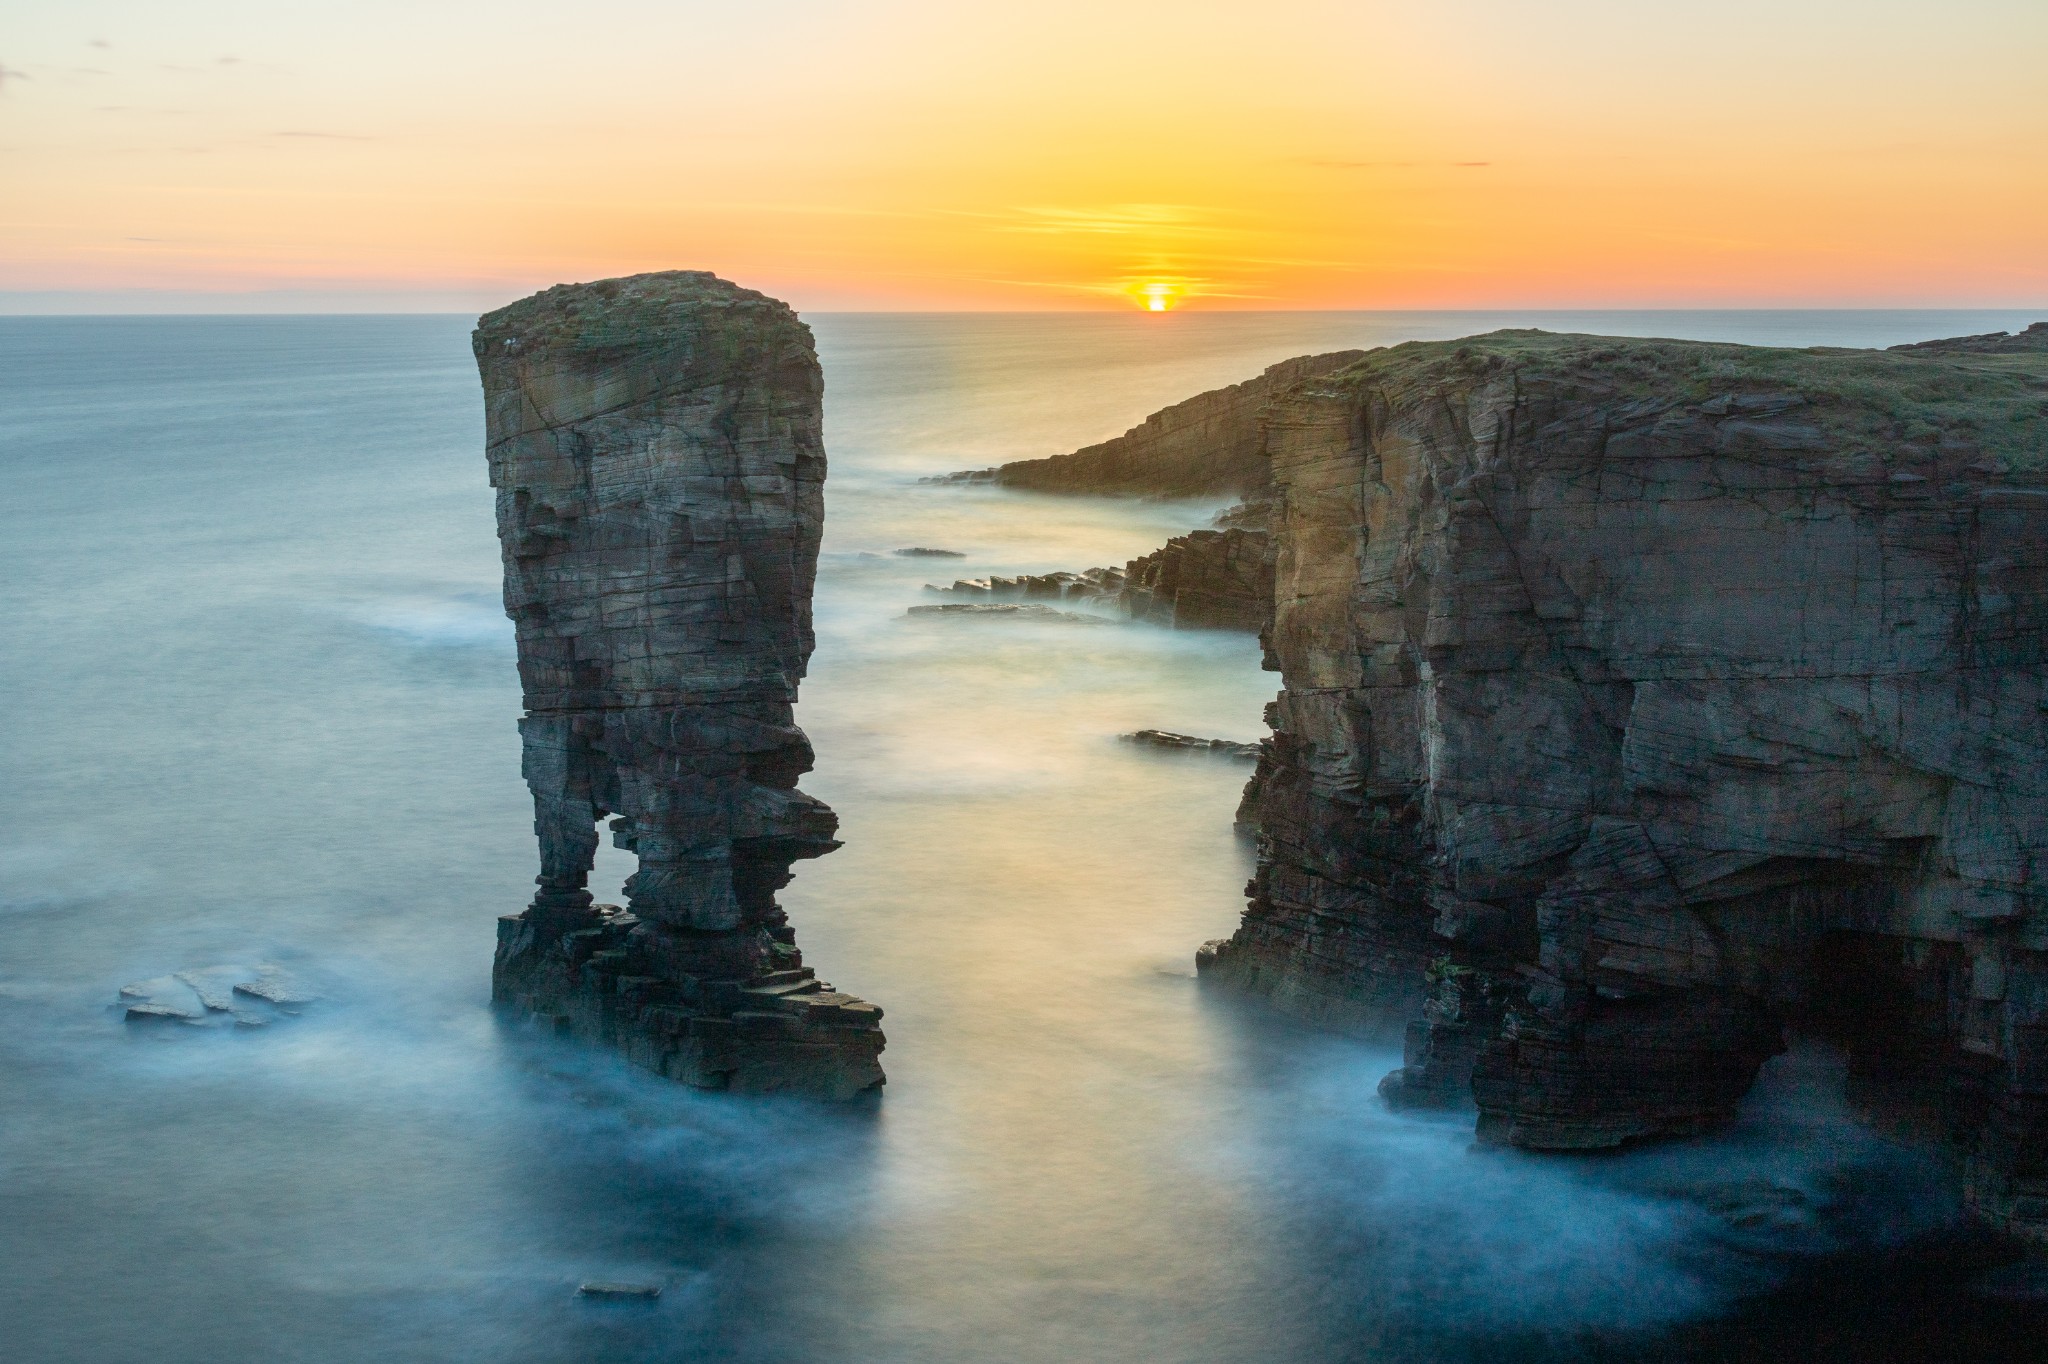 Yesnaby Castle, Orkney - image by Akmal Hakim